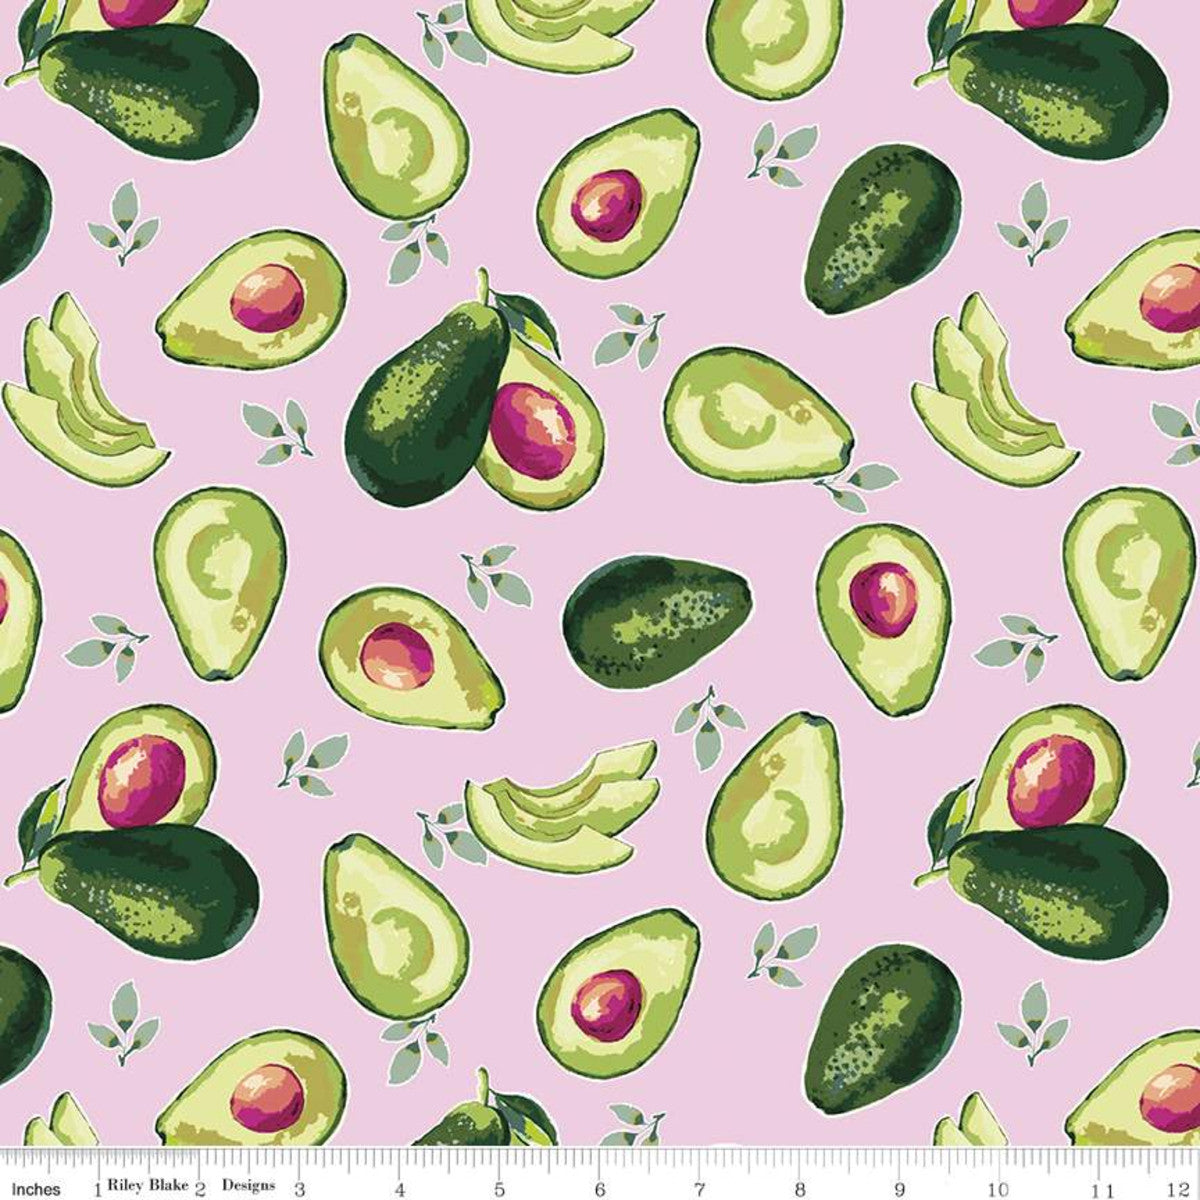 Lucy June Avocados on Pink - Weave & Woven